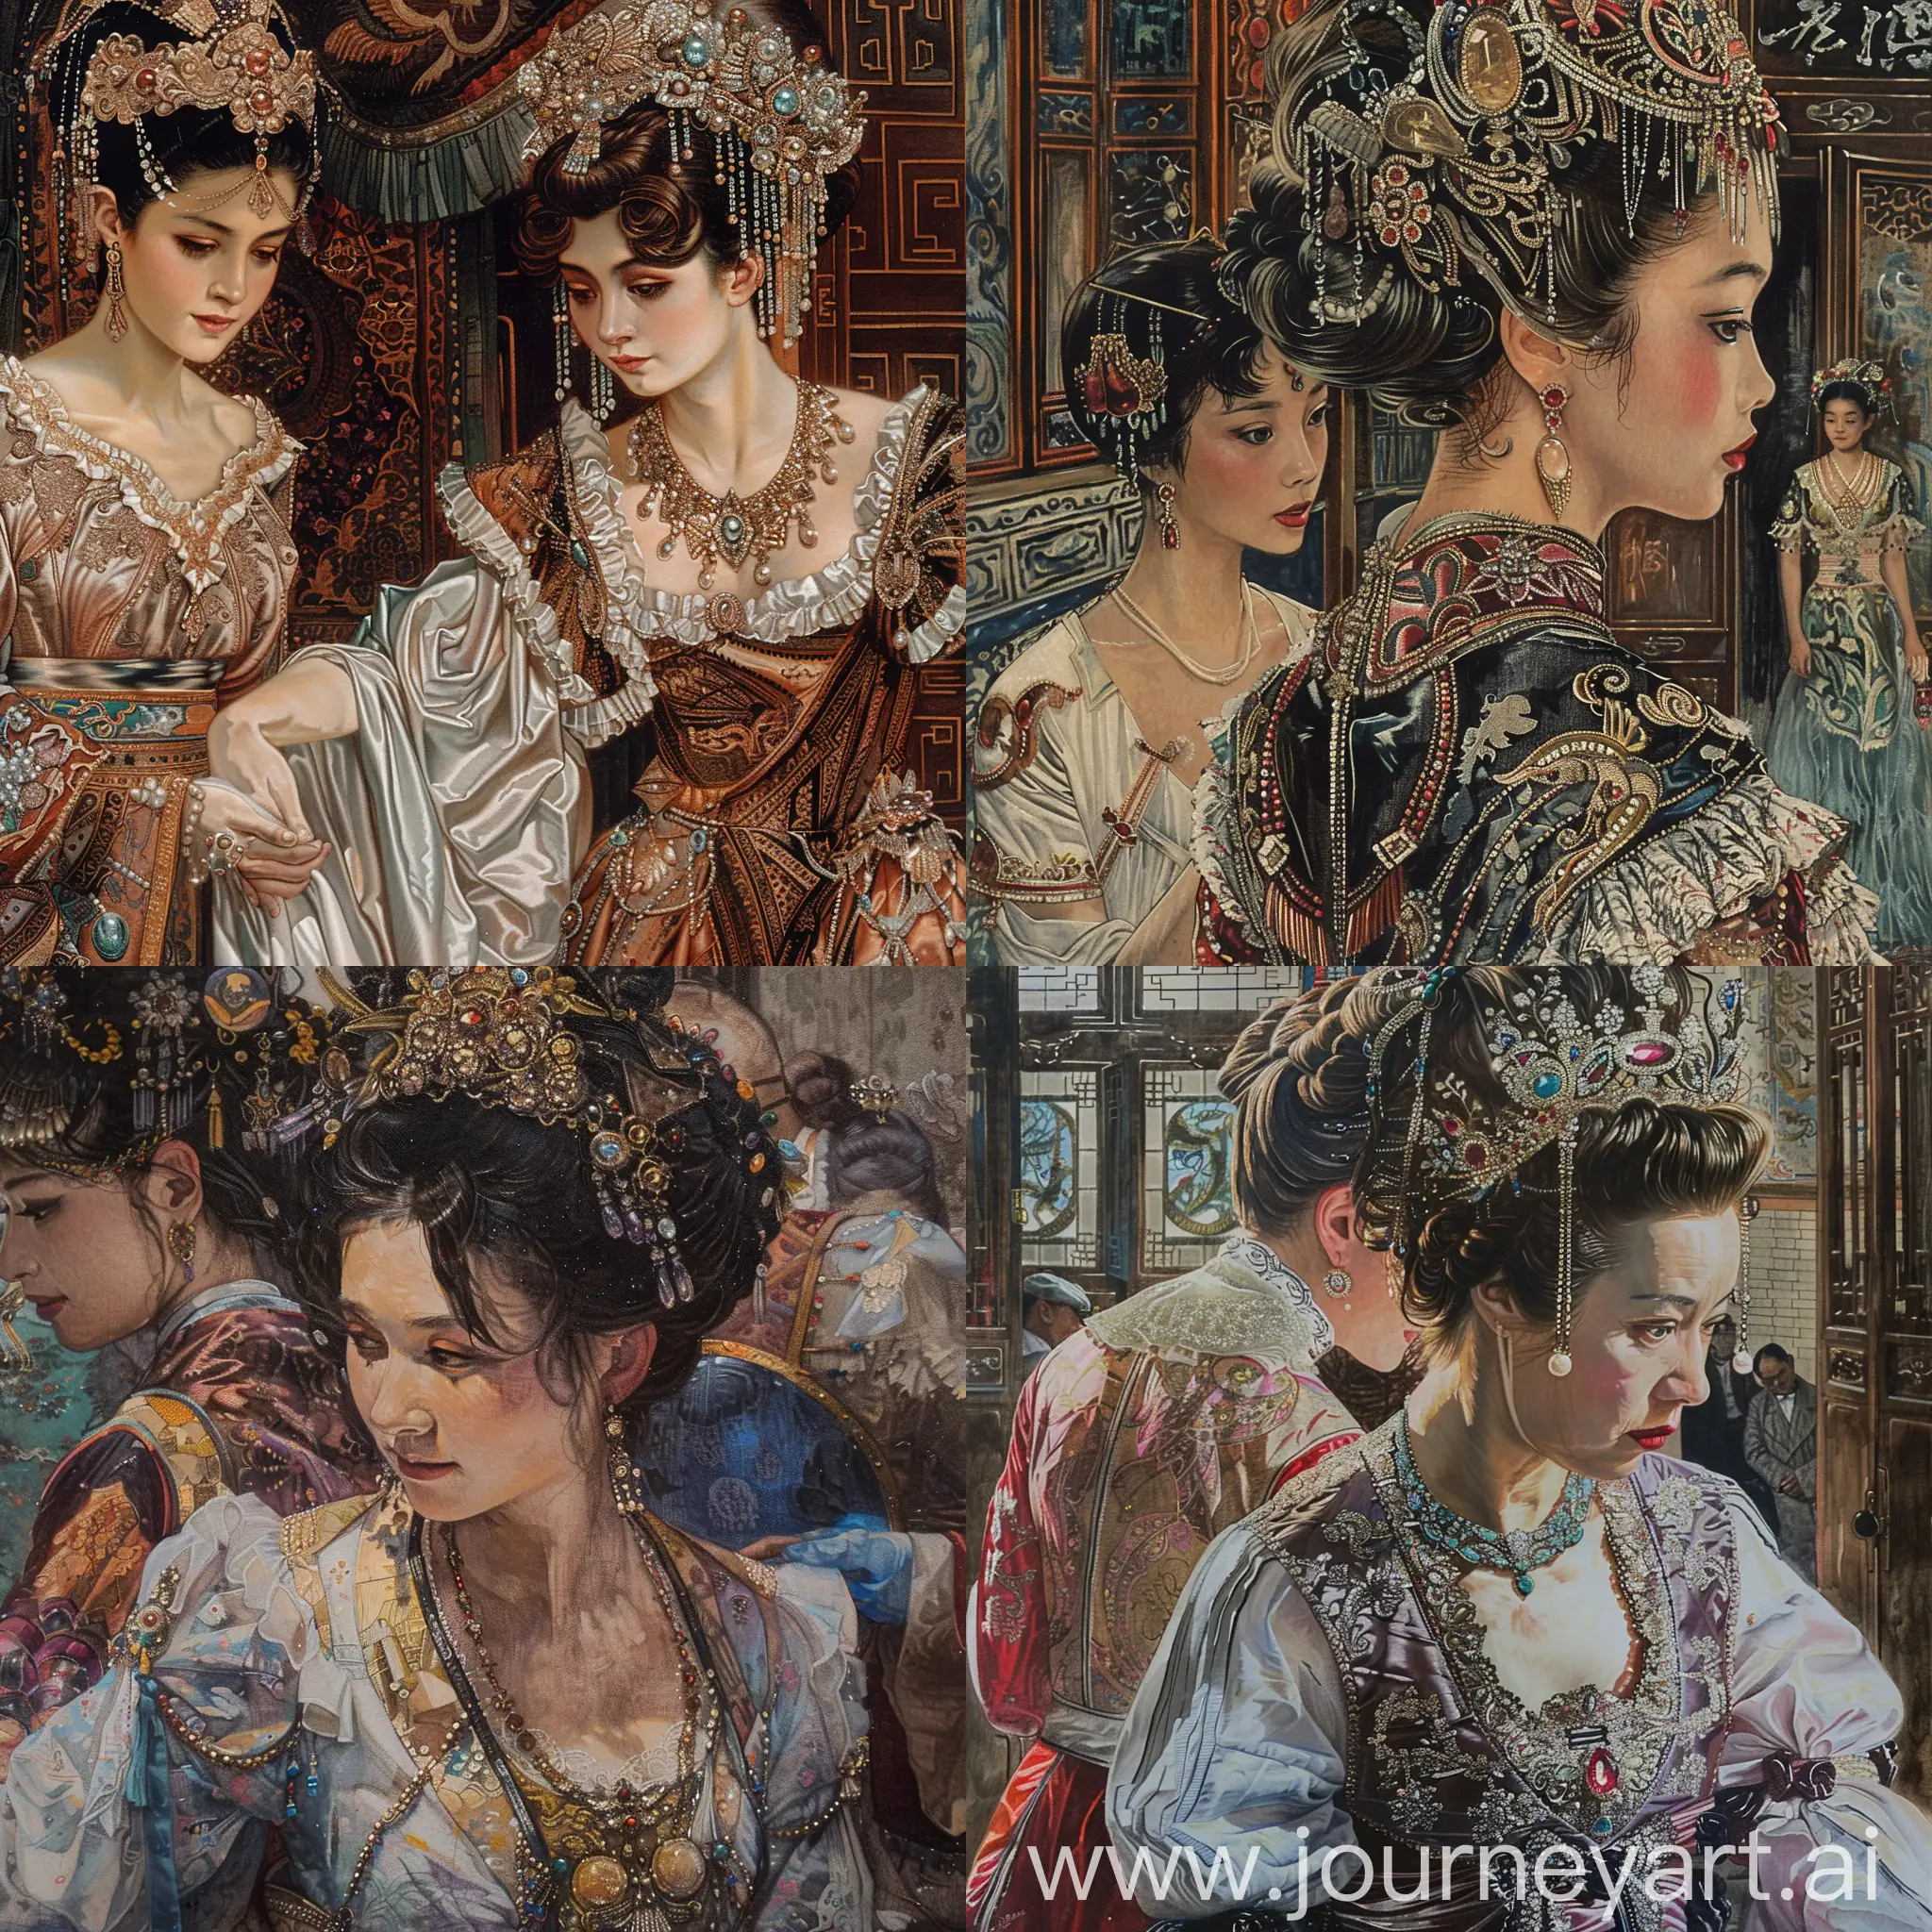 Luxurious-Empress-Dowager-Cixi-Assisted-by-Maid-in-Magnificent-Portrait